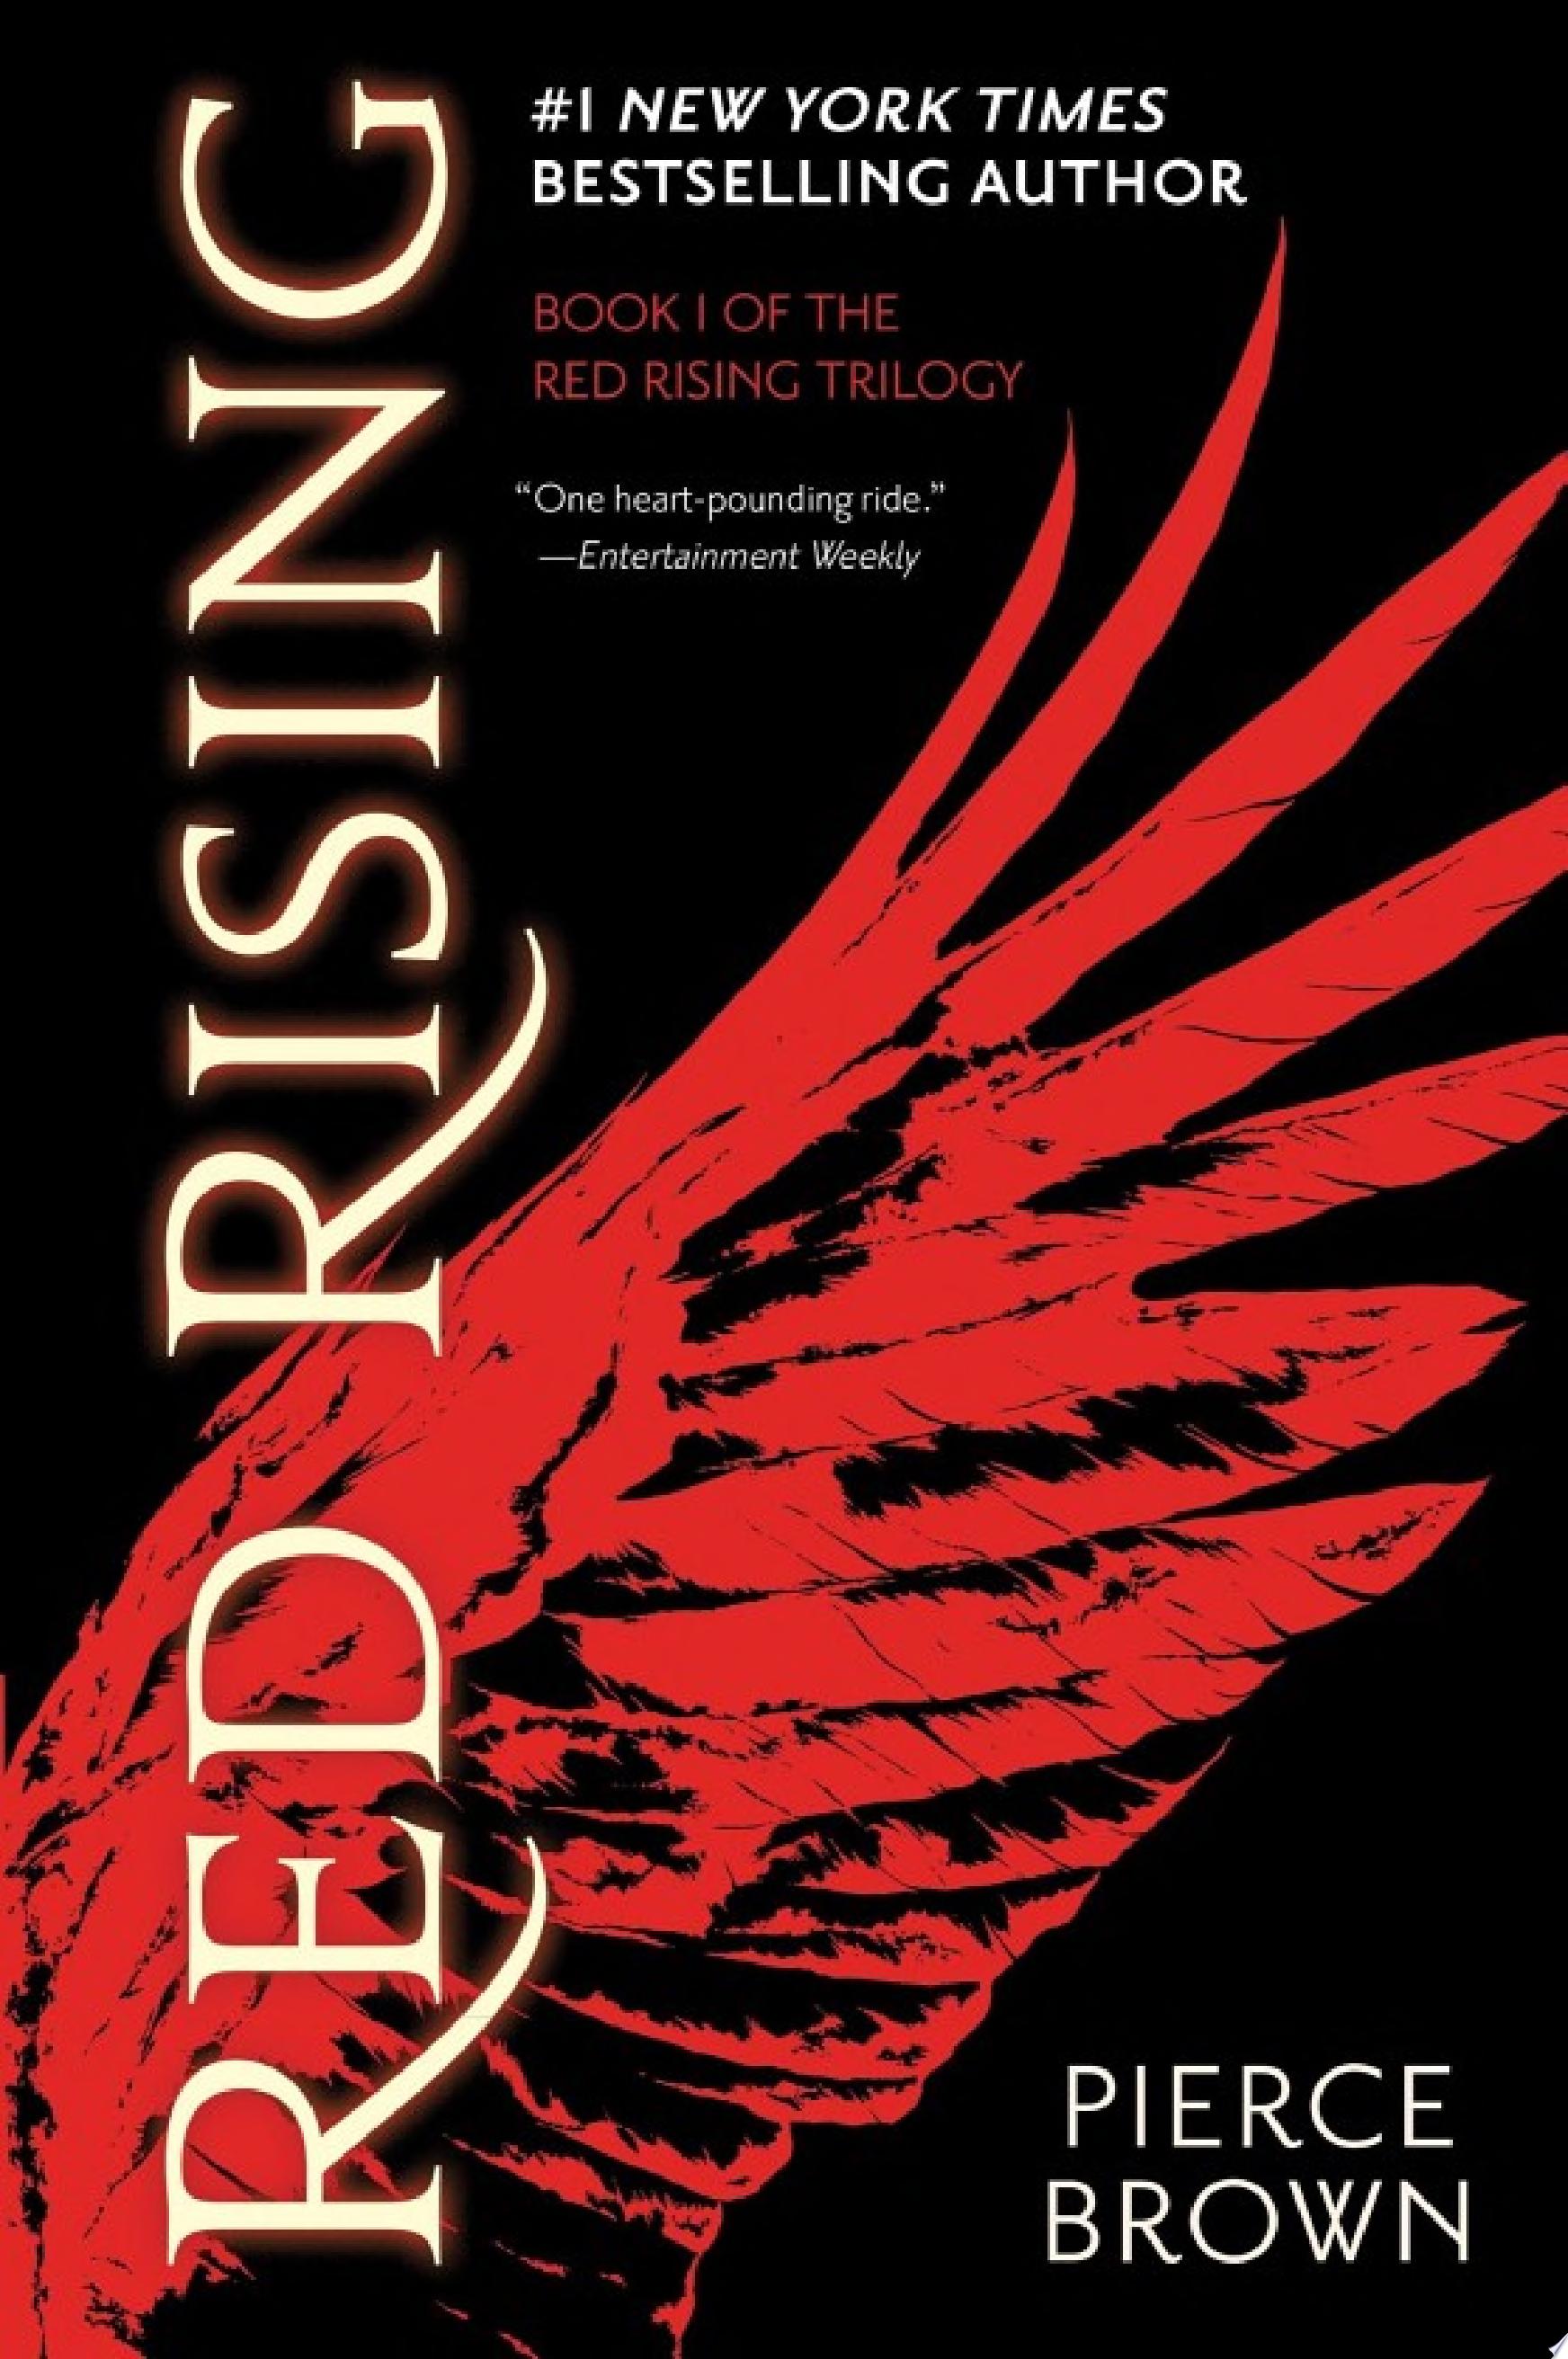 Image for "Red Rising"